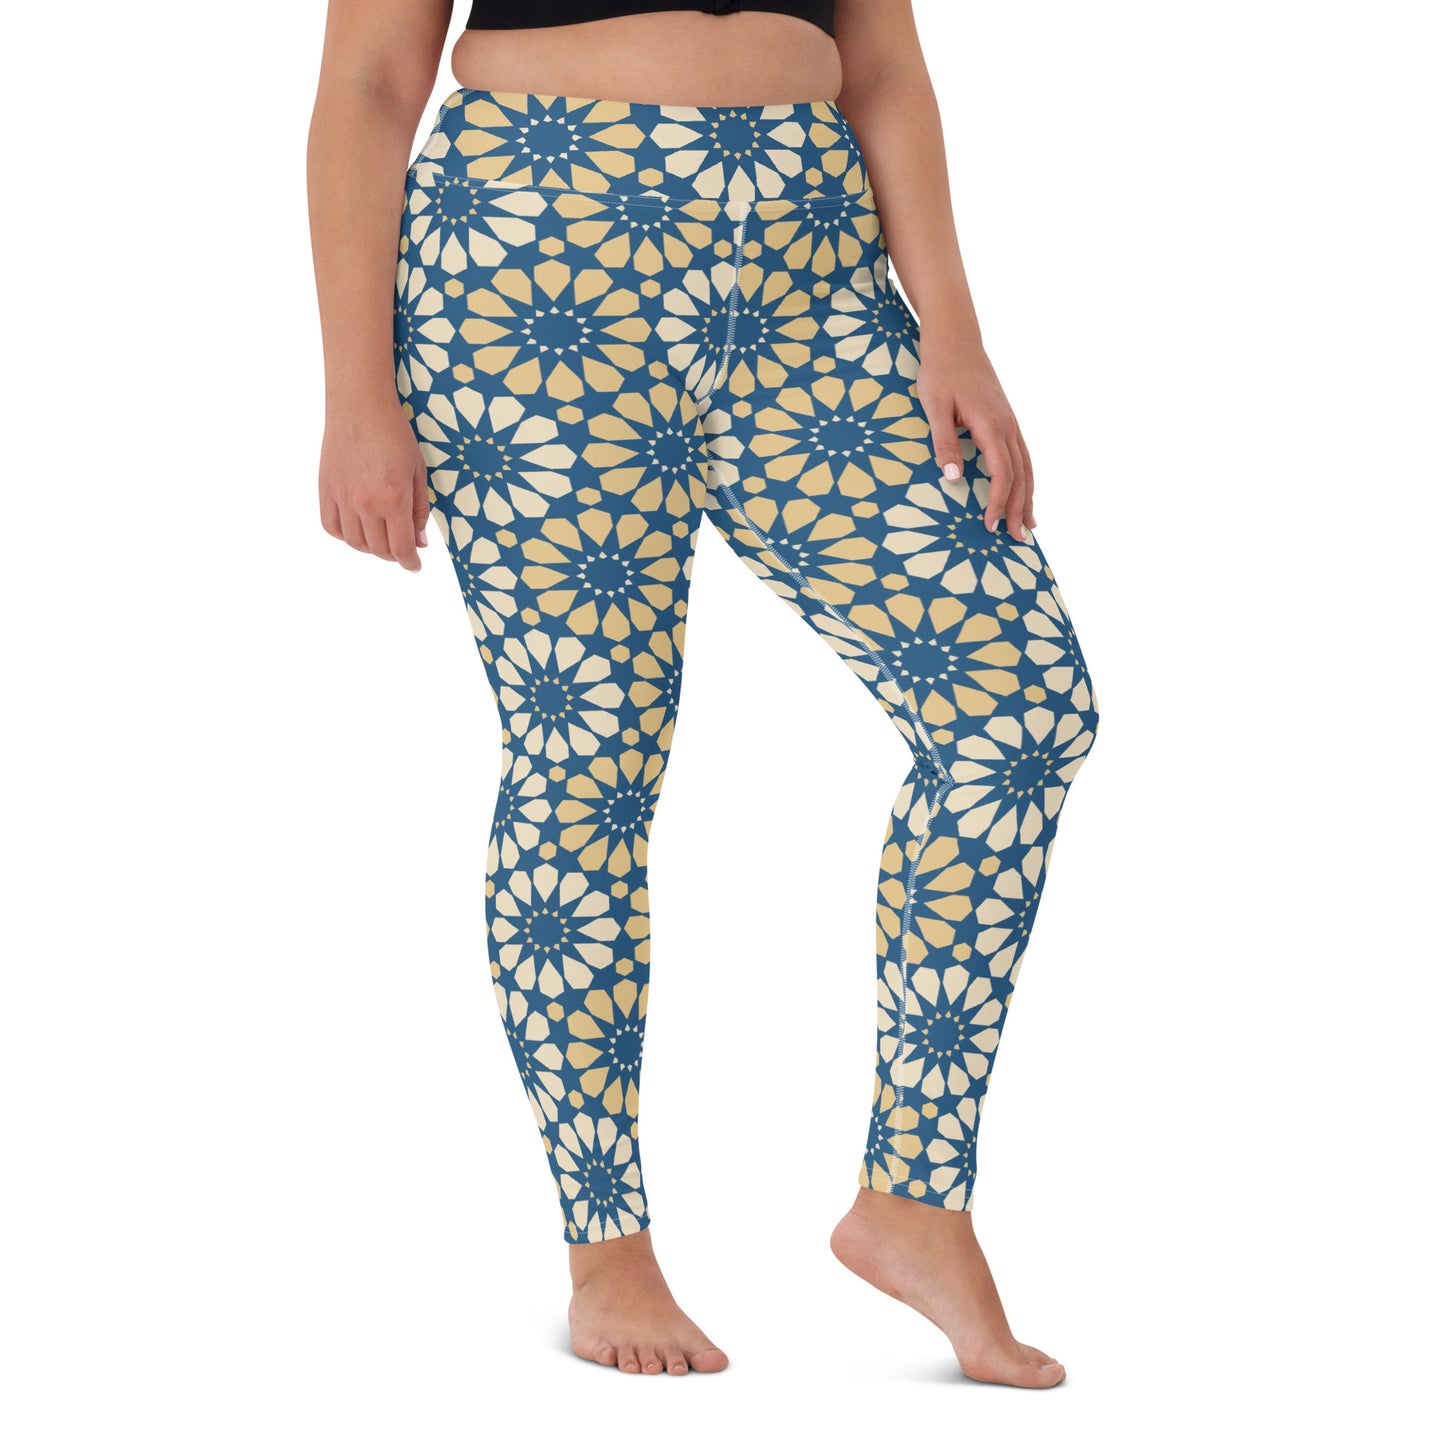 Yoga Leggings with raised waistband, fabric stretches, part of the Sunflower Collection